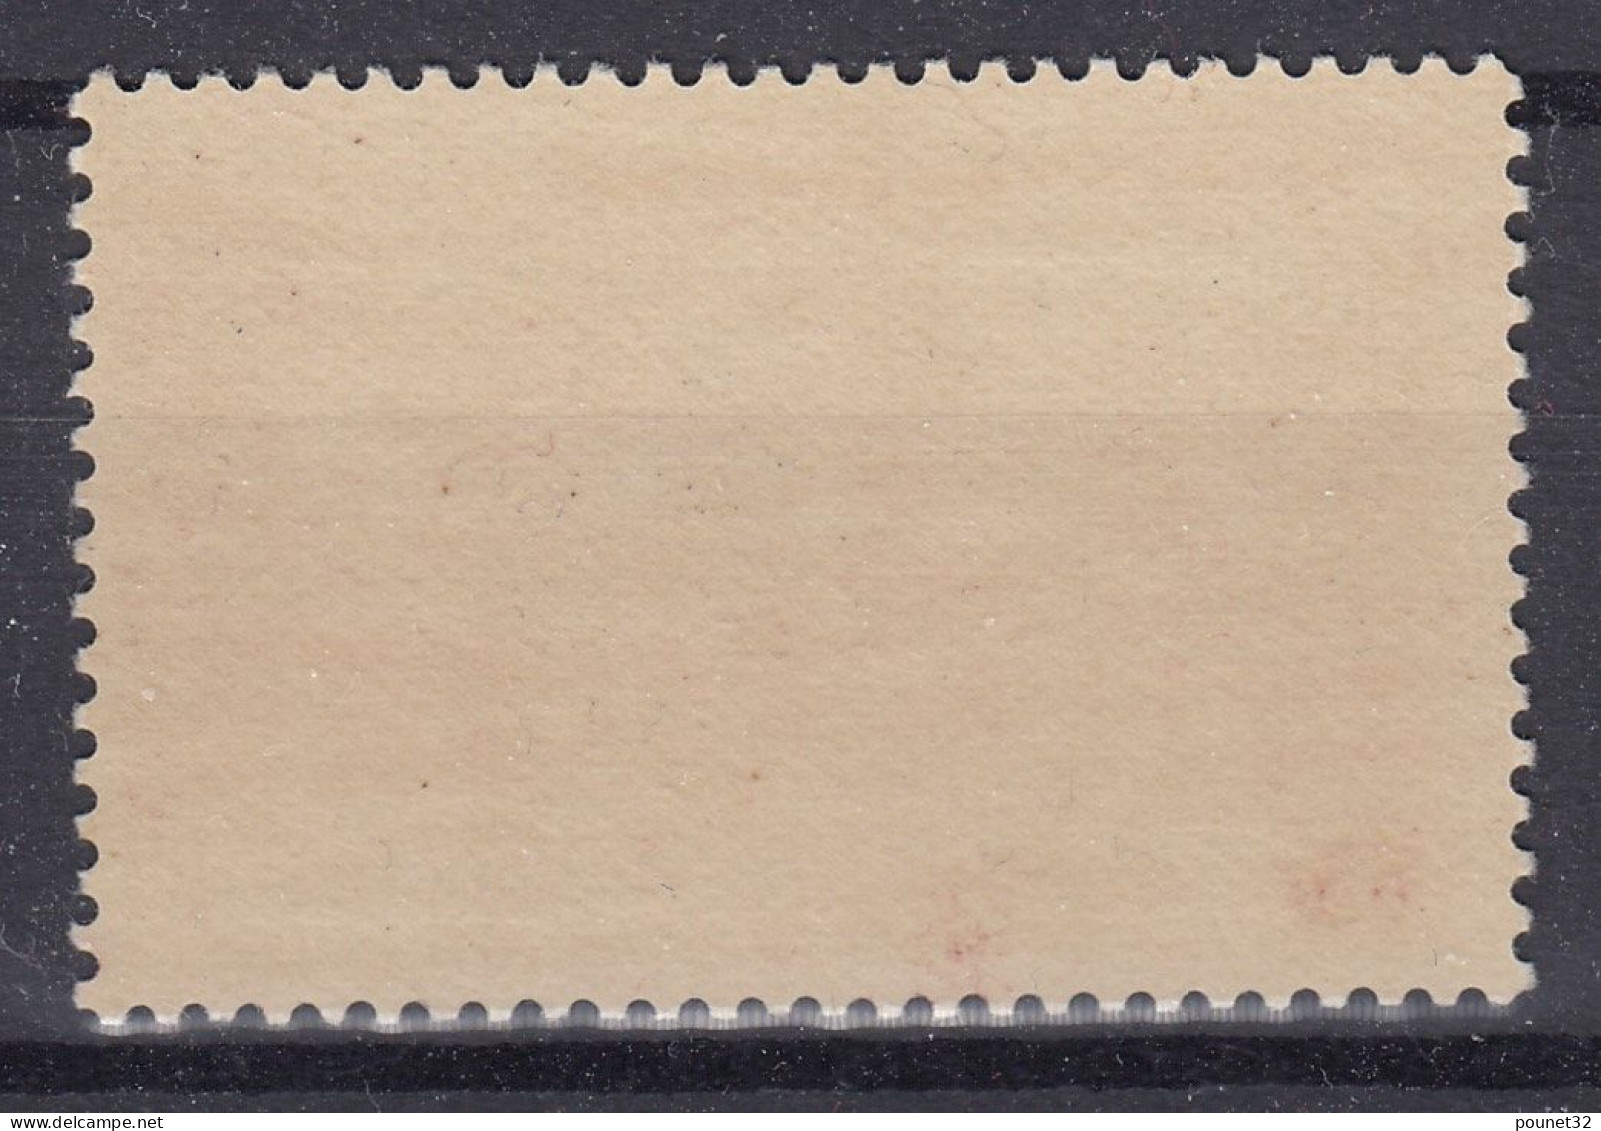 TIMBRE FRANCE HOTEL DIEU BEAUNE N° 539b PAPIER CARTON NEUF ** GOMME SANS CHARNIERE - Unused Stamps